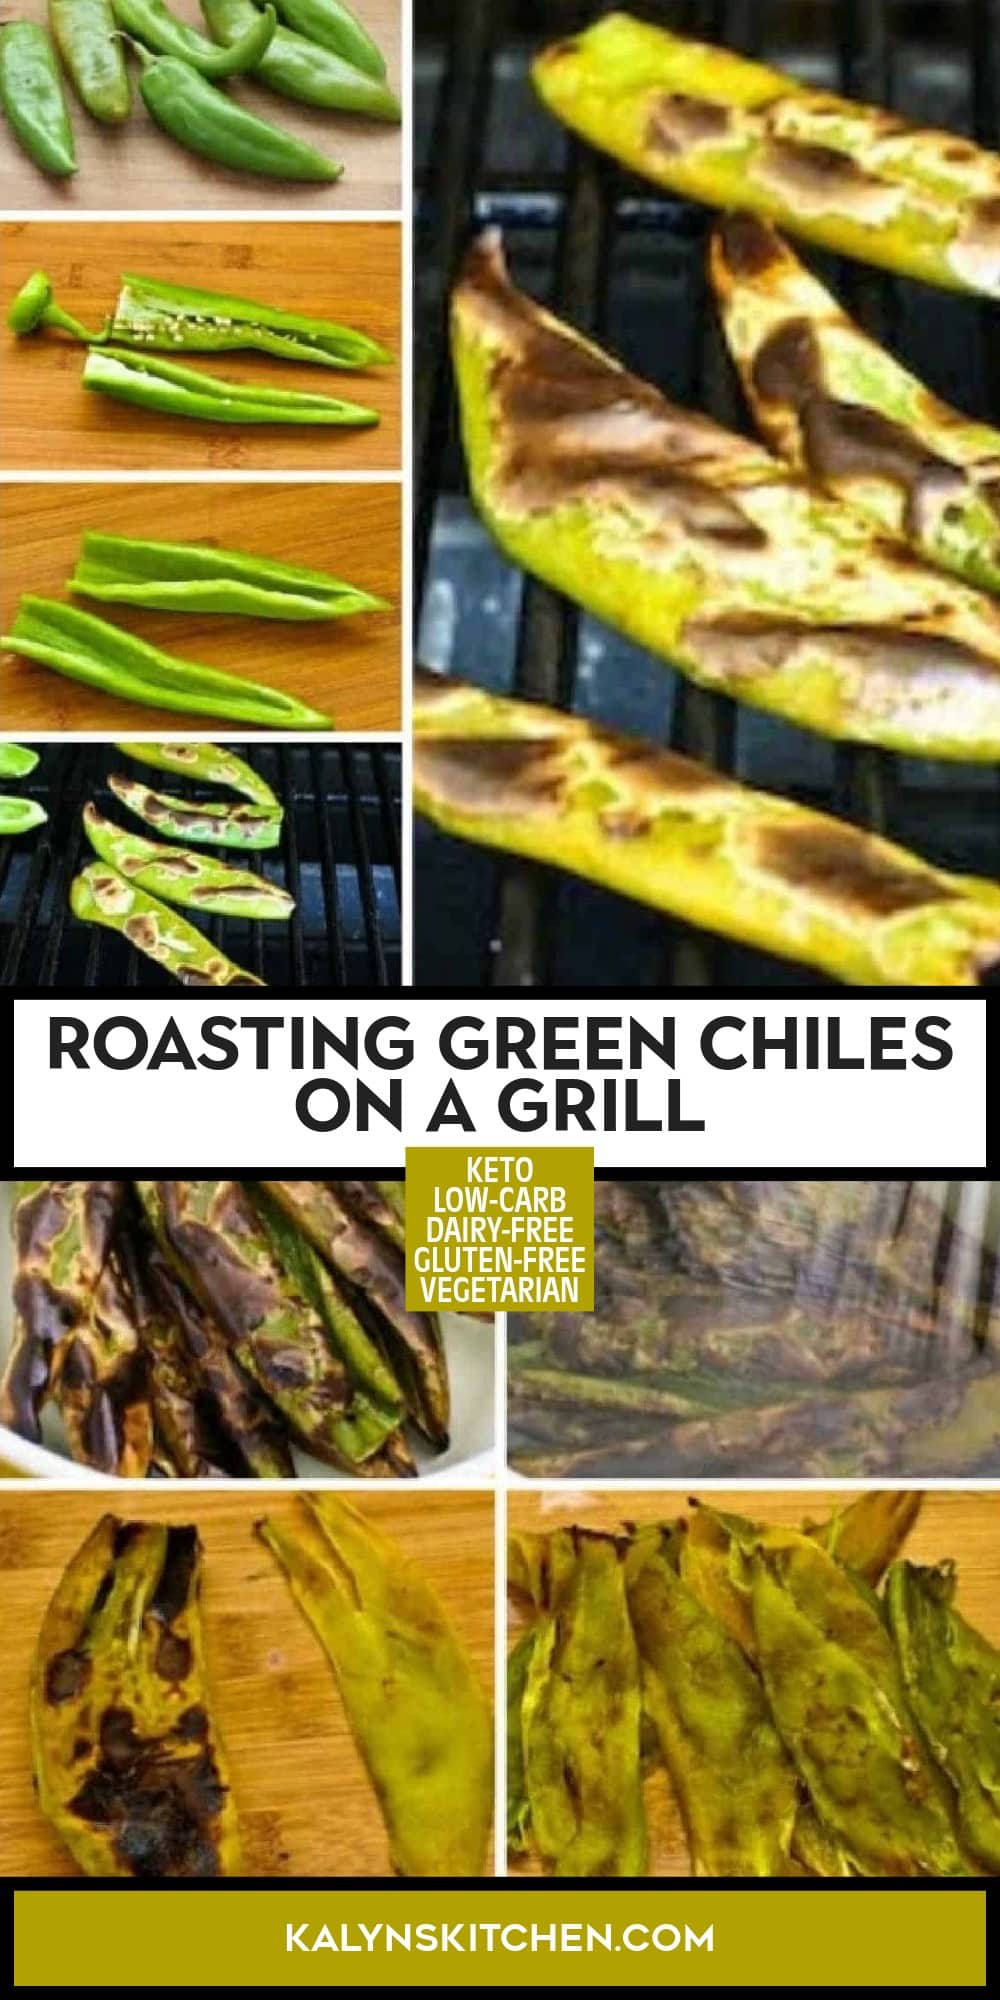 Pinterest image of Roasting Green Chiles on a Grill